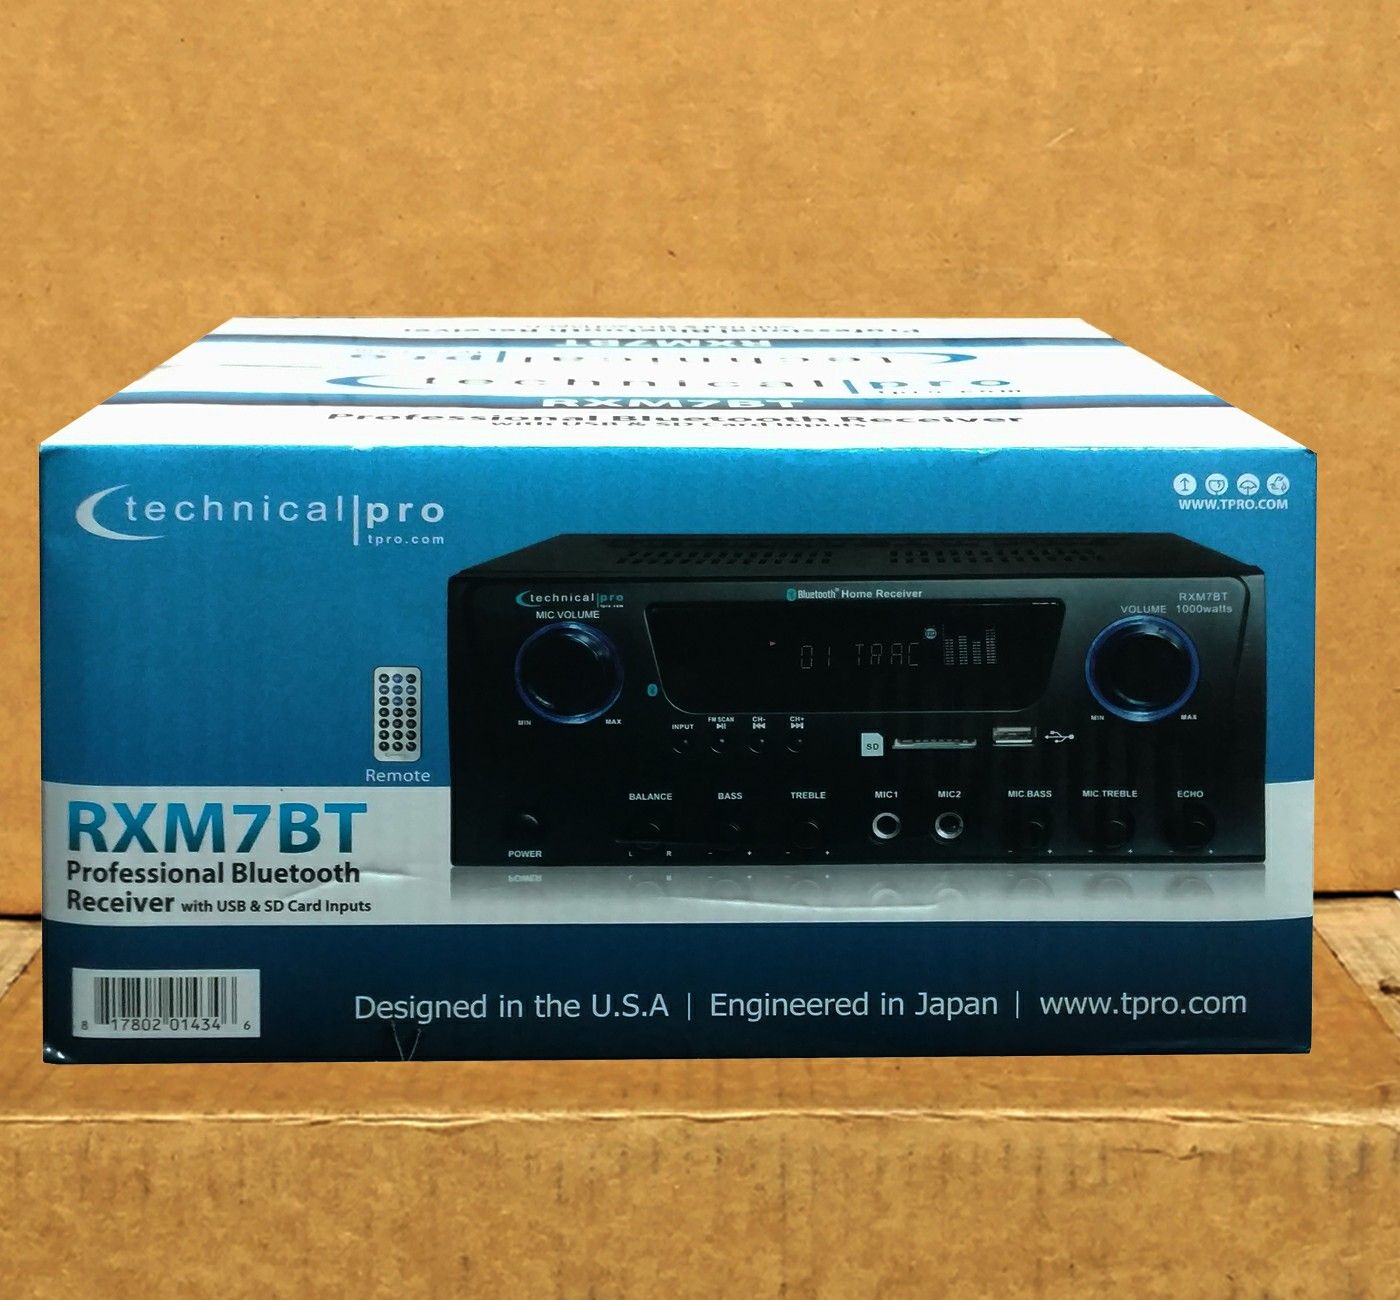 Technical Pro Stereo Audio Receiver Am Fm Bluetooth USB Karaoke ♨️ 100 Day Payment Plan ♨️ No Credit Needed ♨️